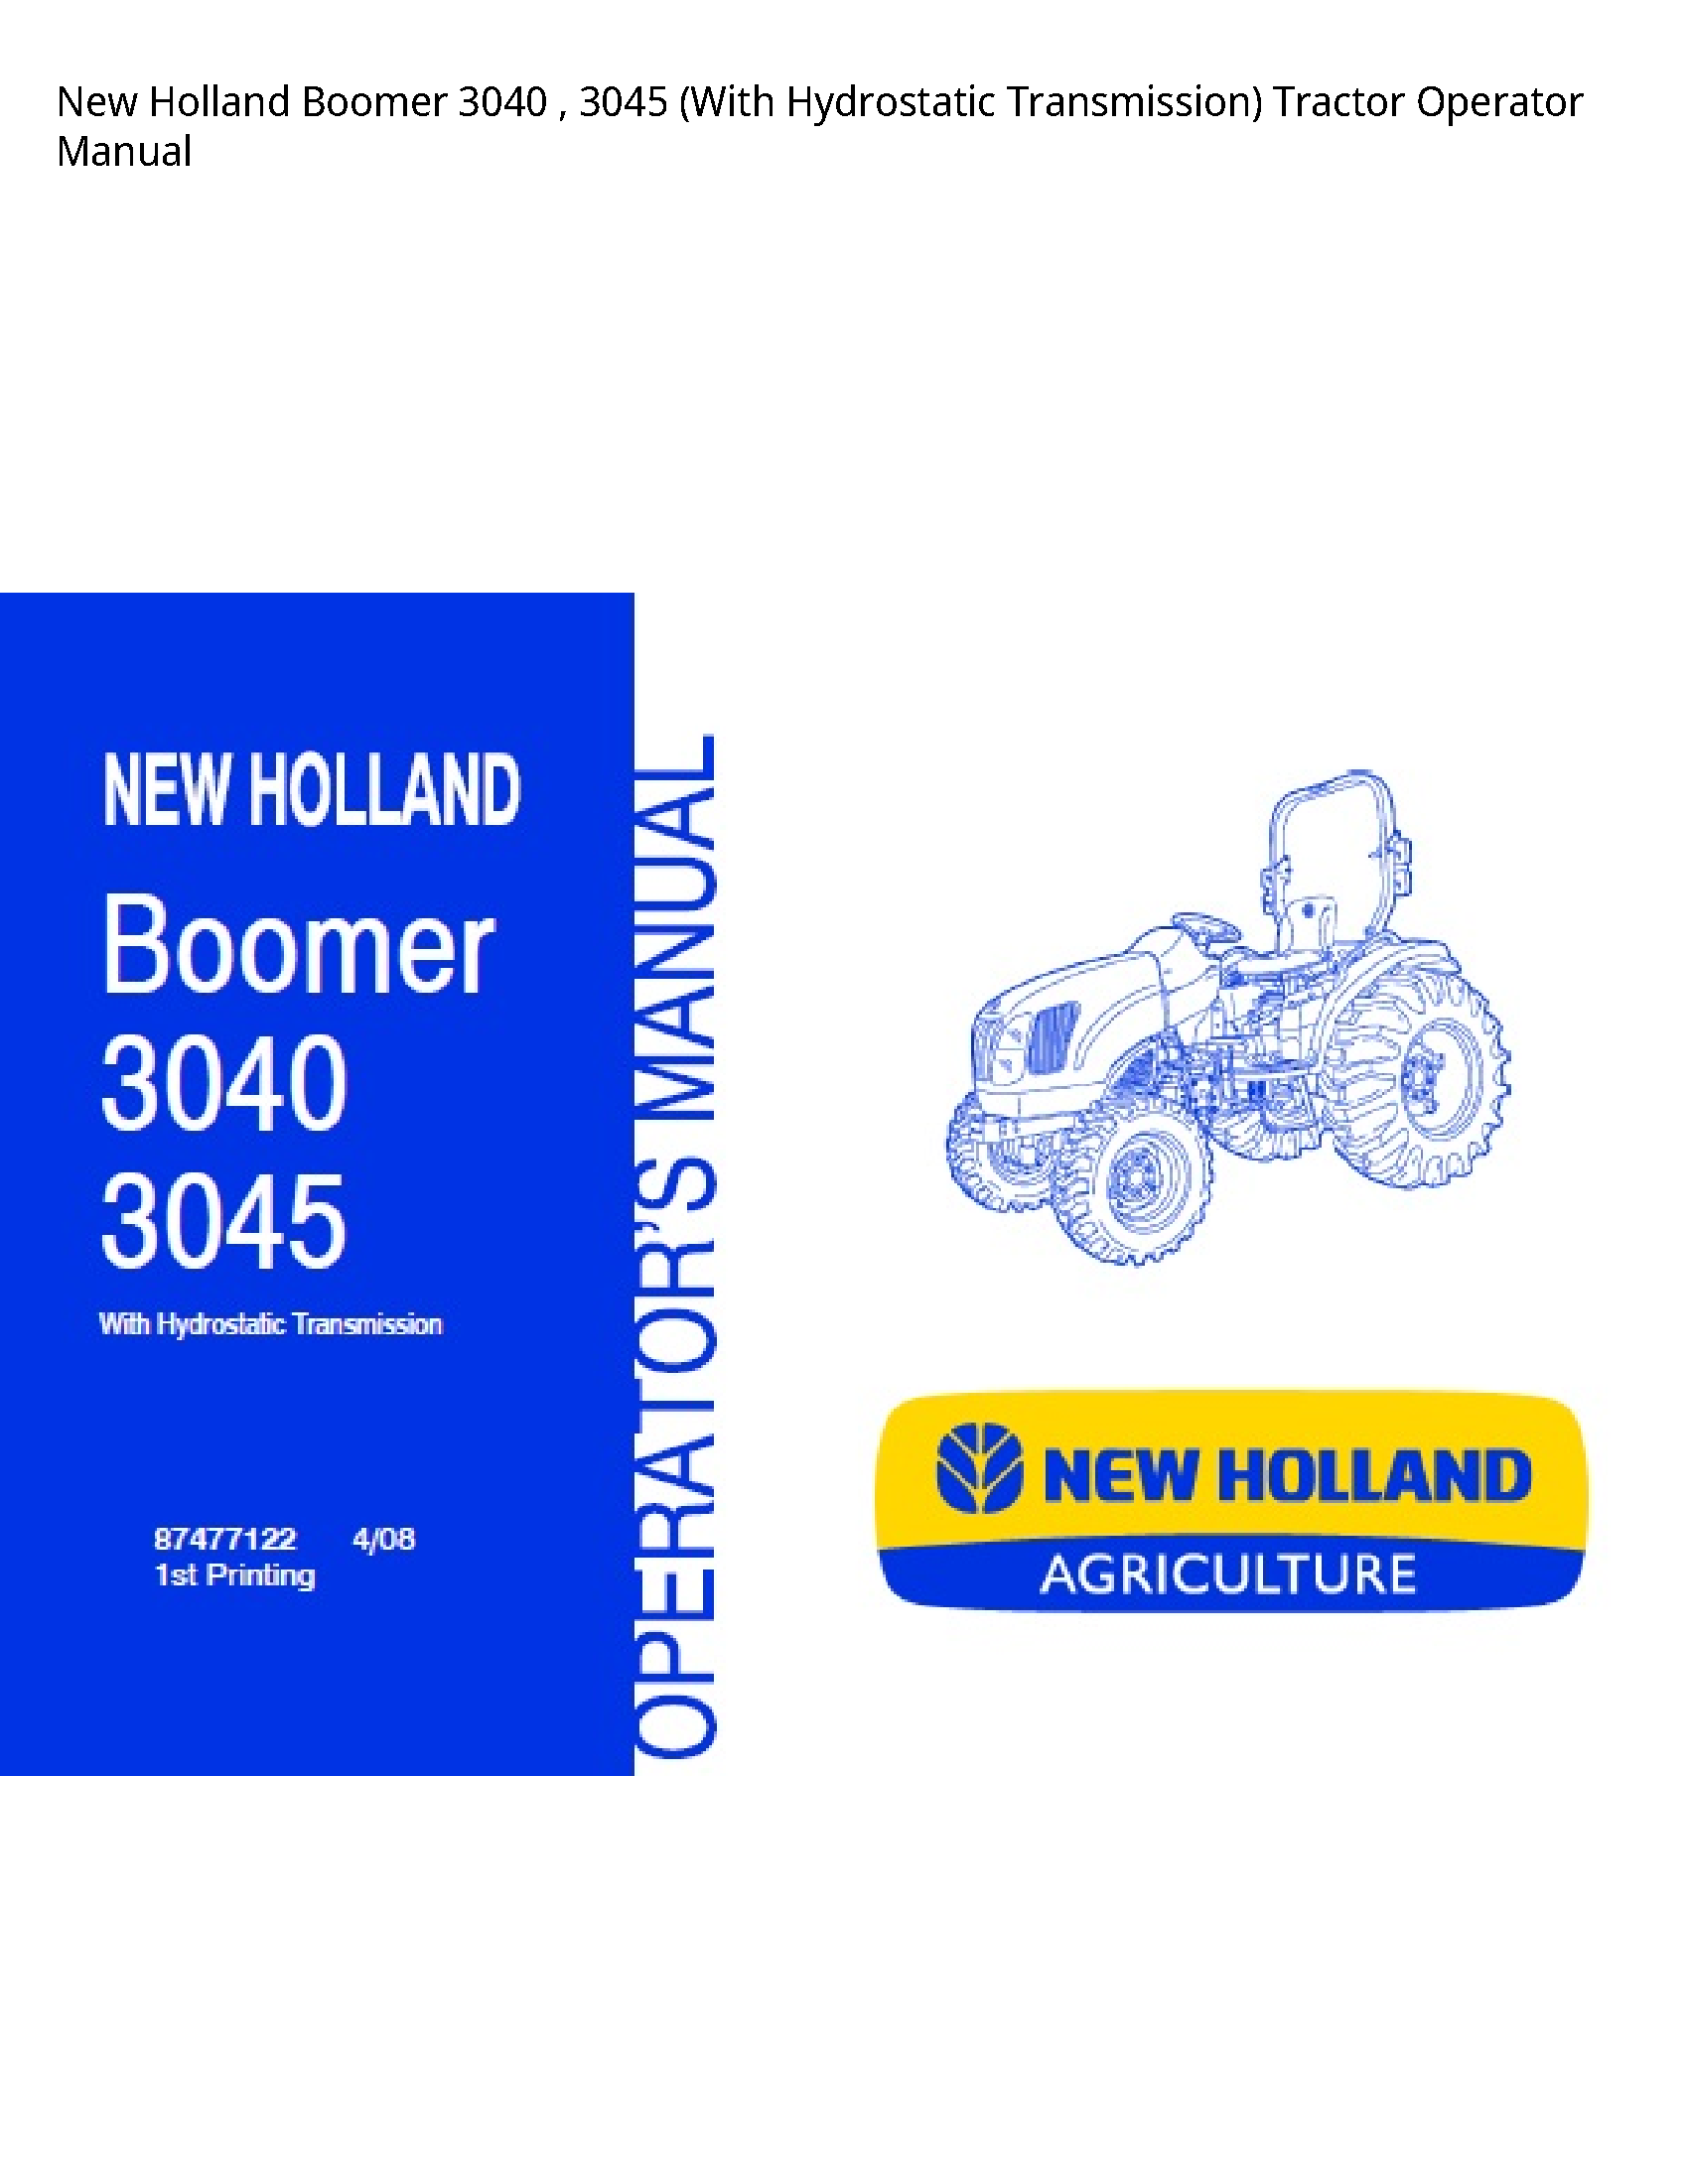 New Holland 3040 Boomer (With Hydrostatic Transmission) Tractor Operator manual